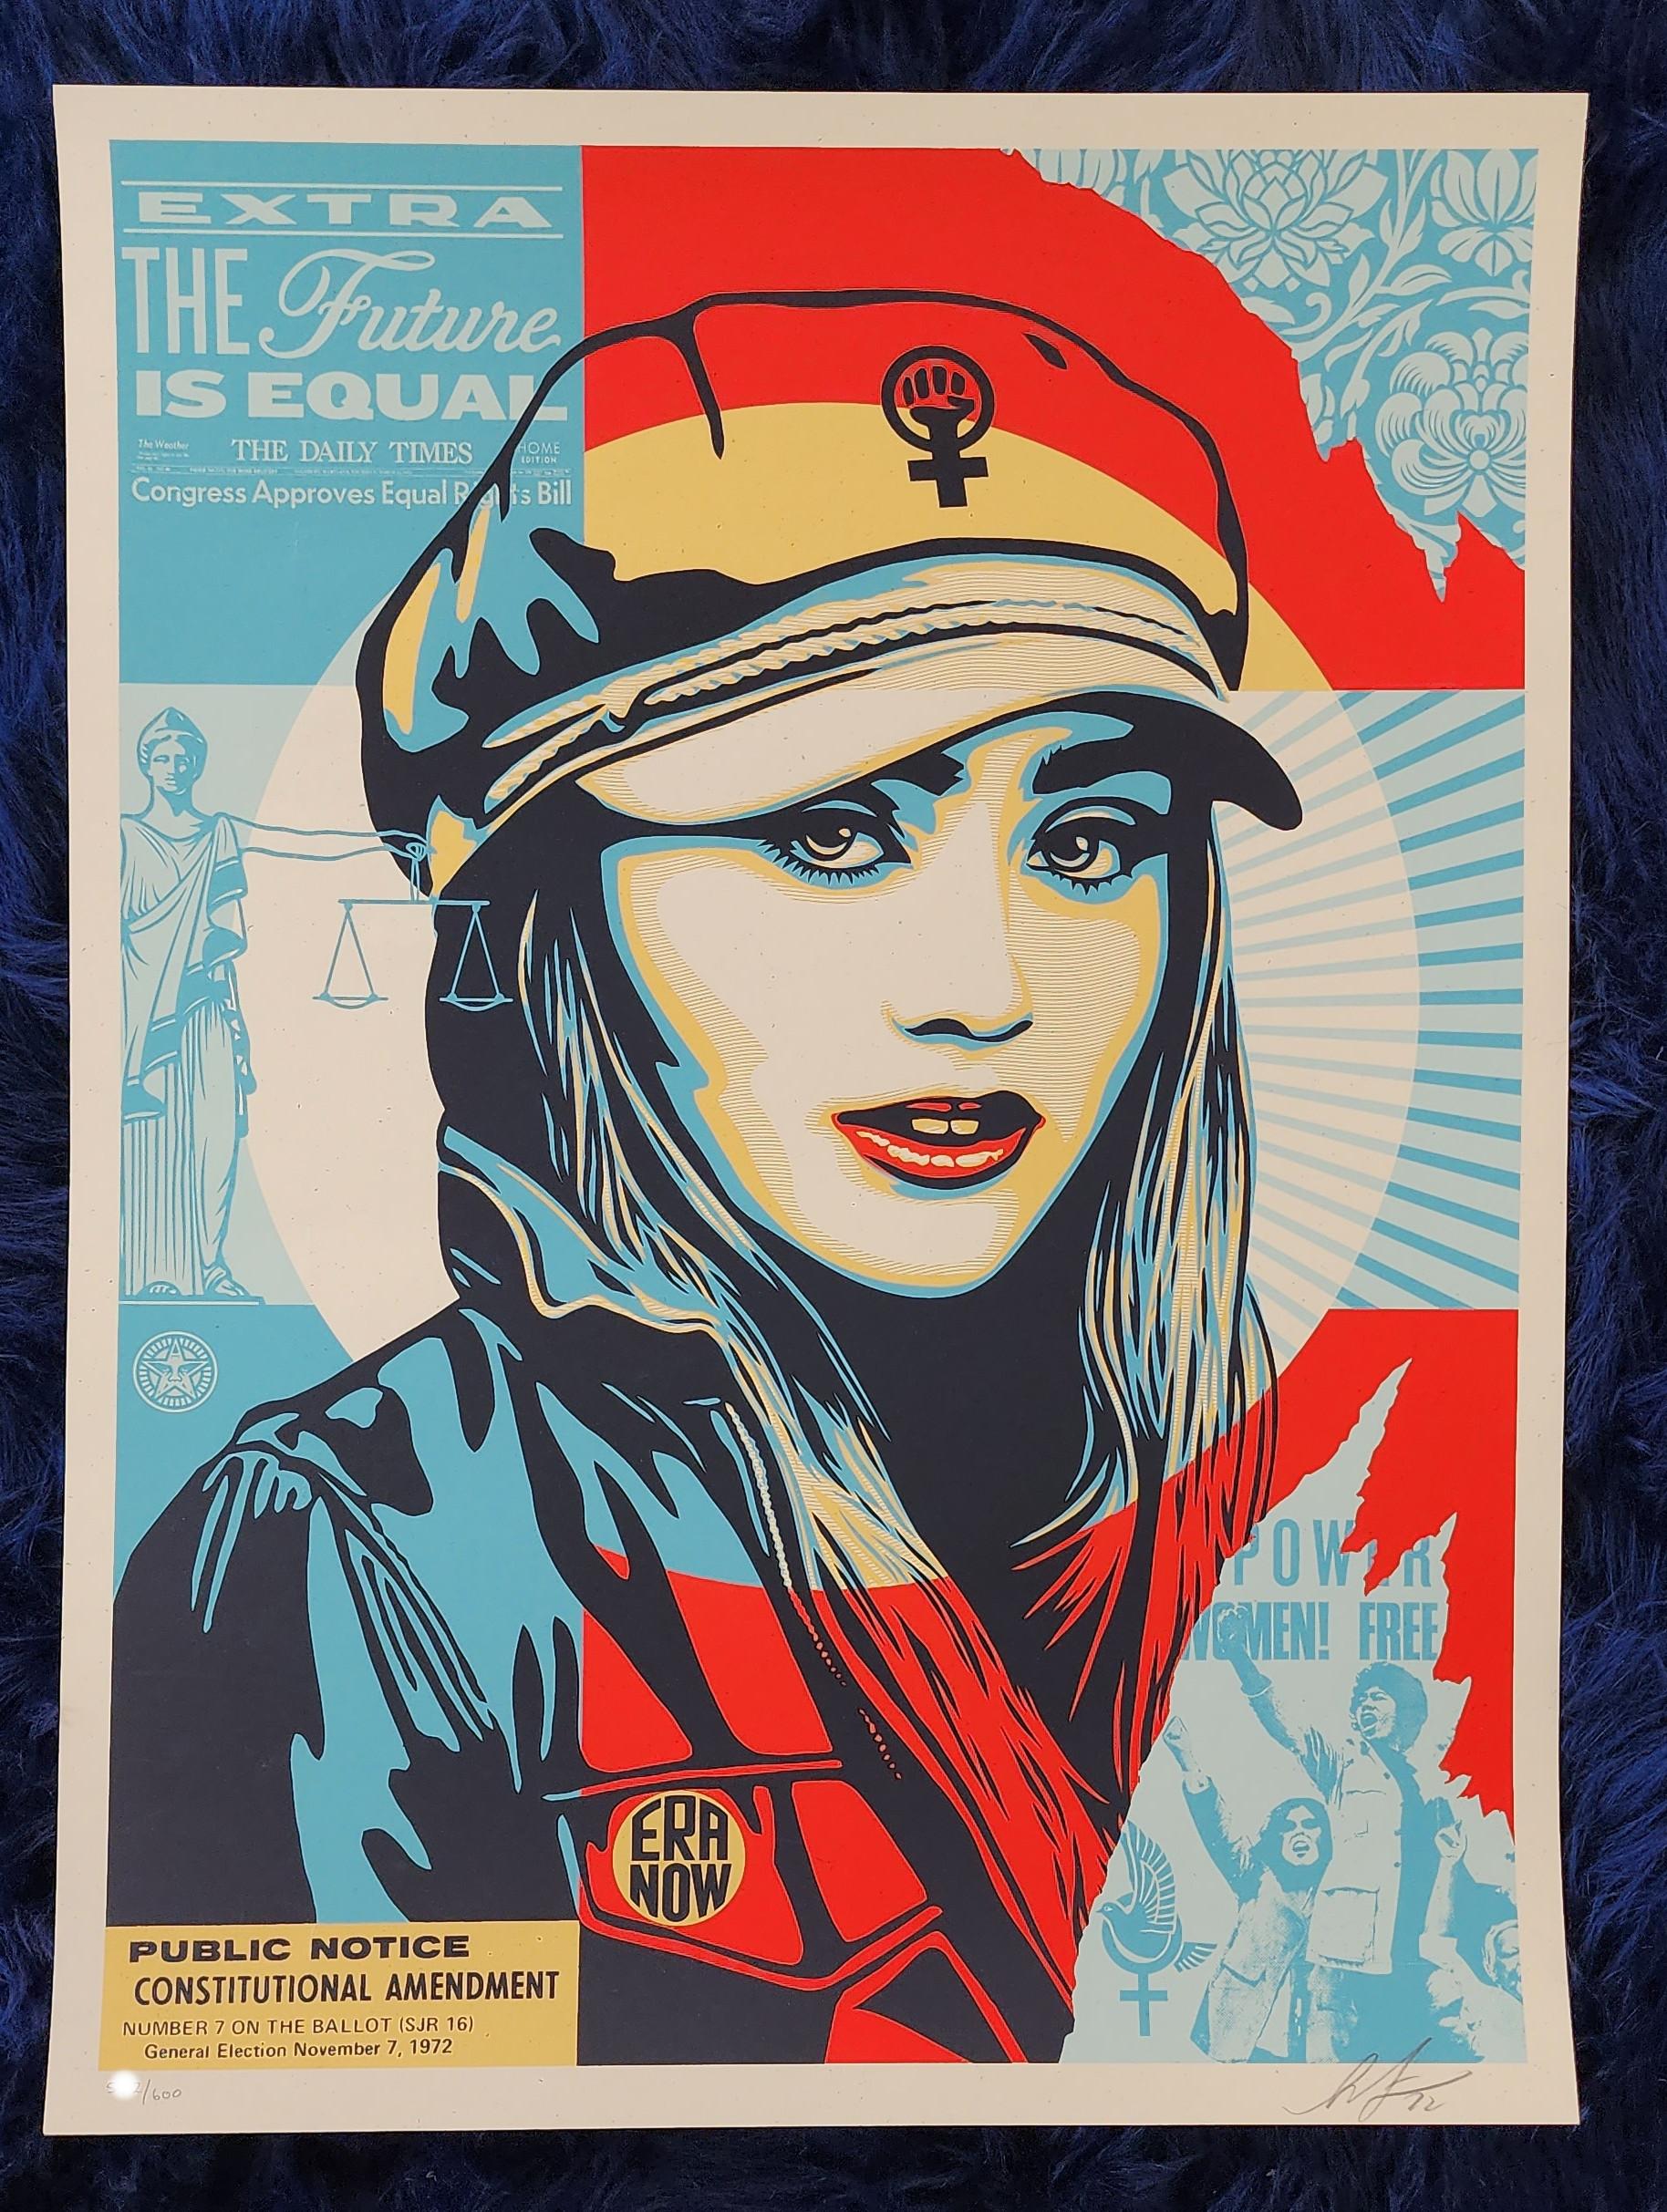 The Future Is Equal (Iconic, ERA, women’s rights, gender equality) - Contemporary Print by Shepard Fairey